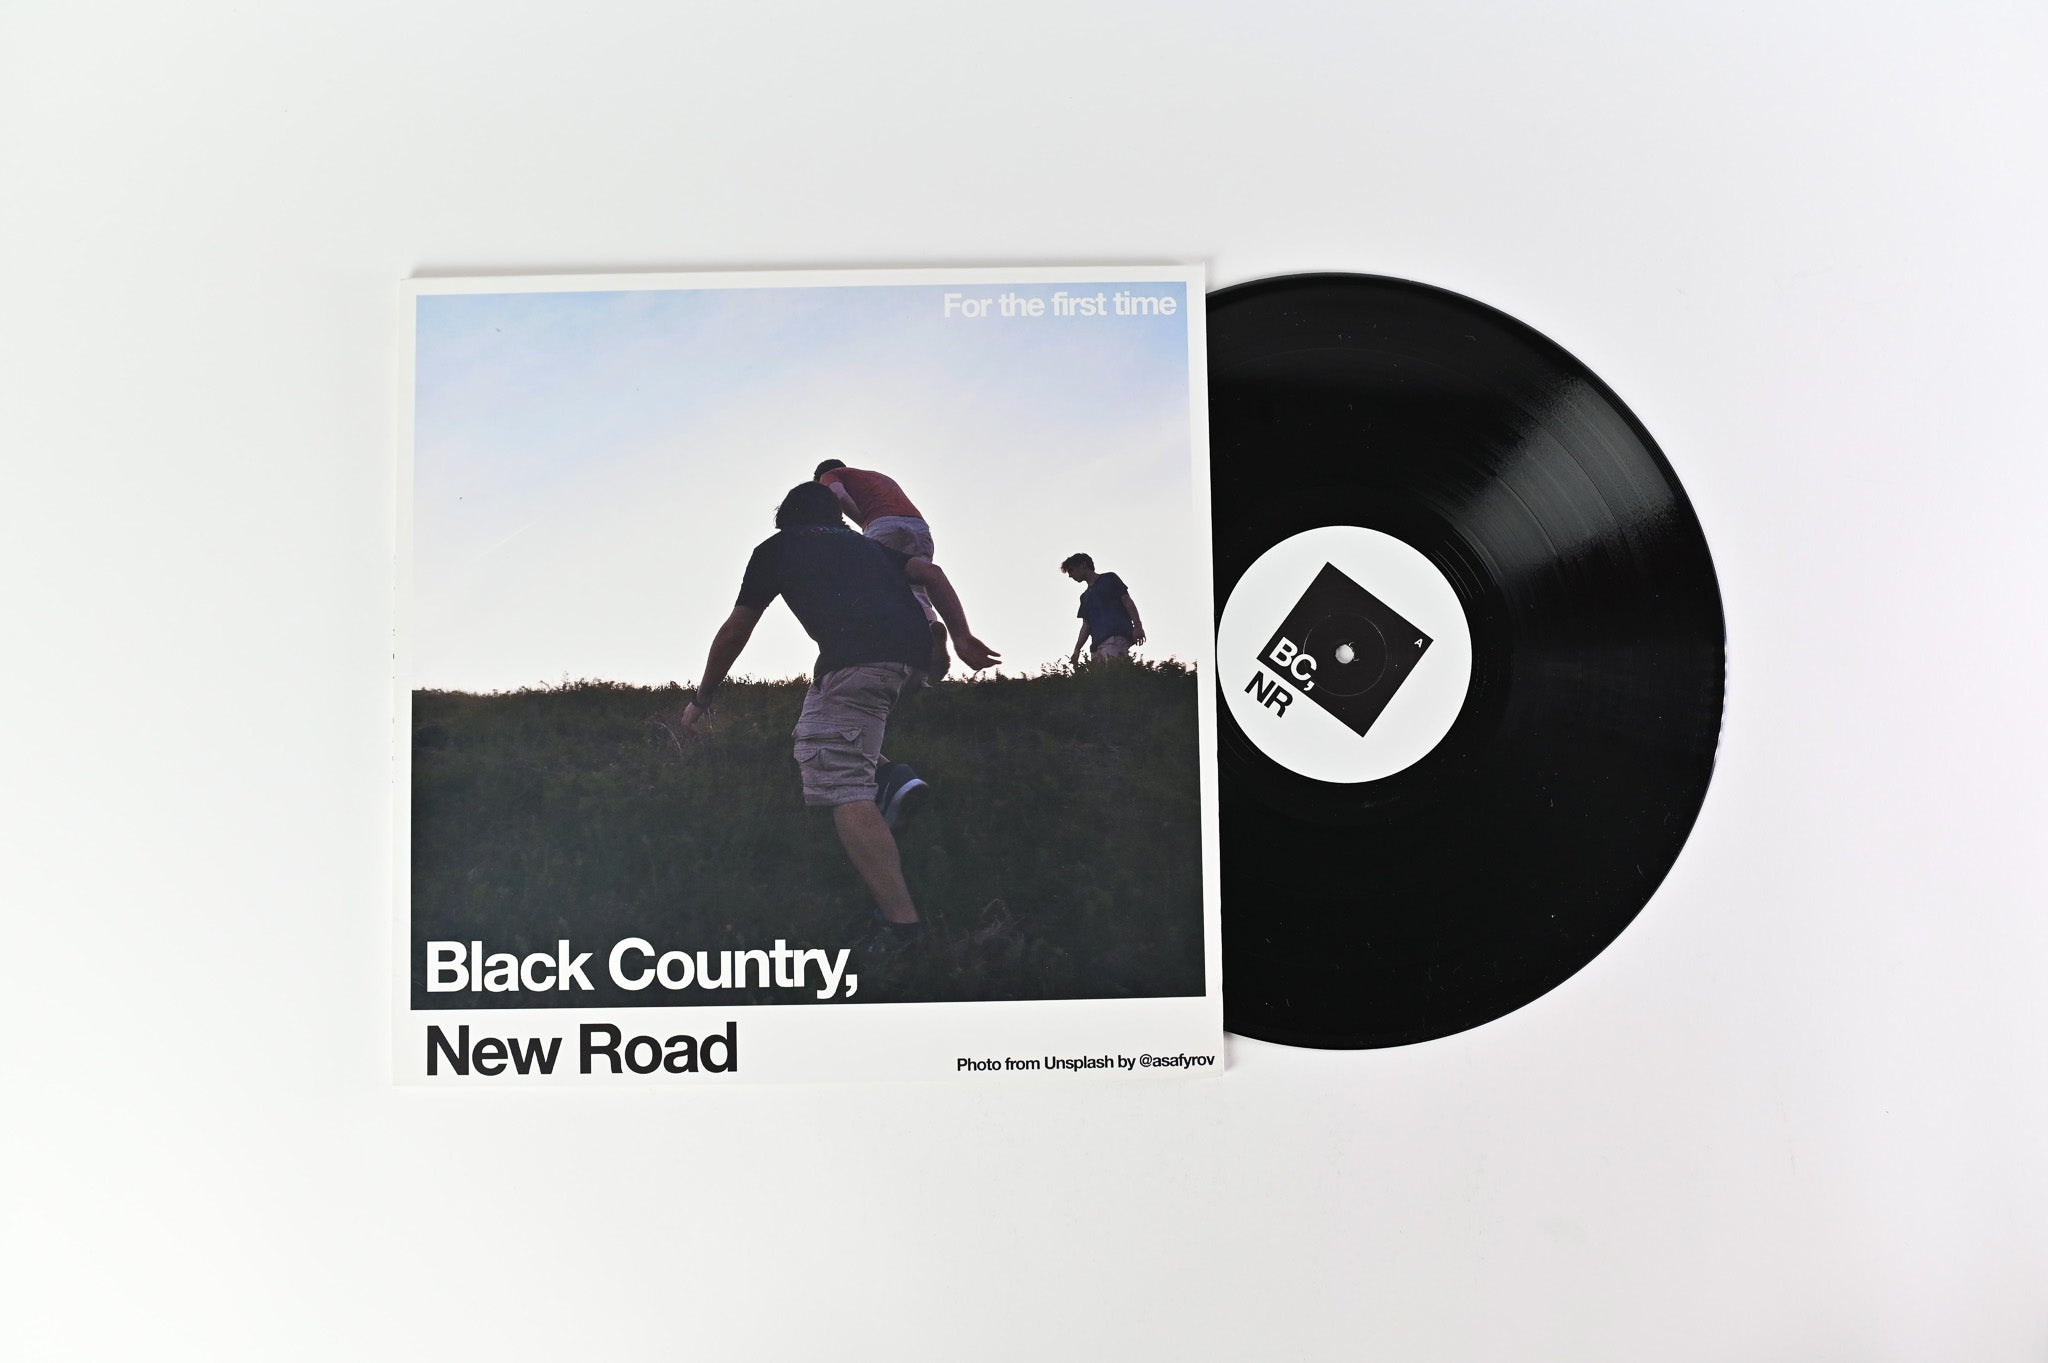 Black Country, New Road - For The First Time on Ninja Tune